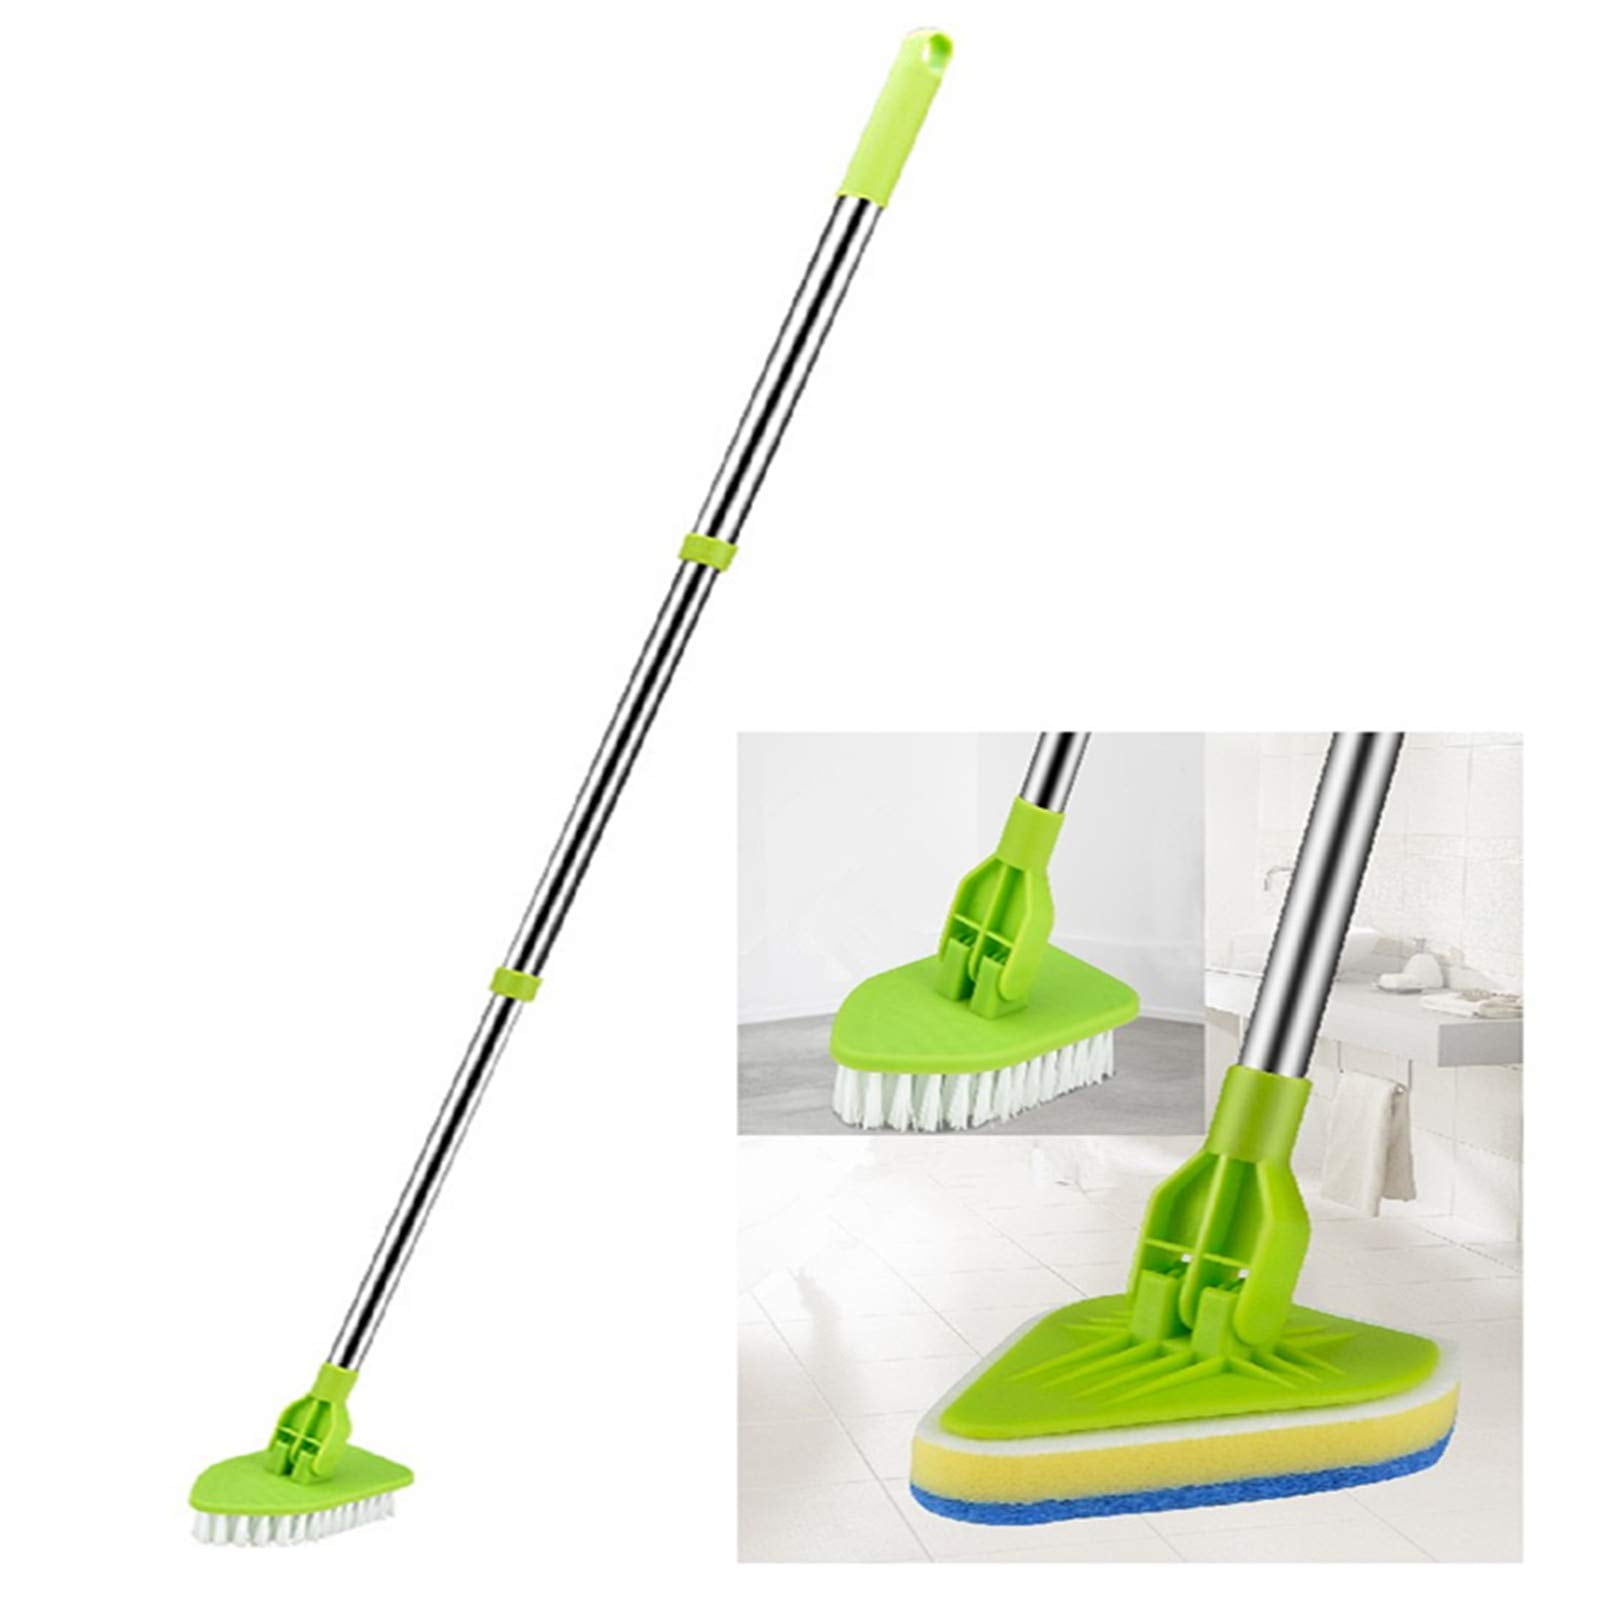 Shop the Viral Geniani Electric Spin Scrubber on